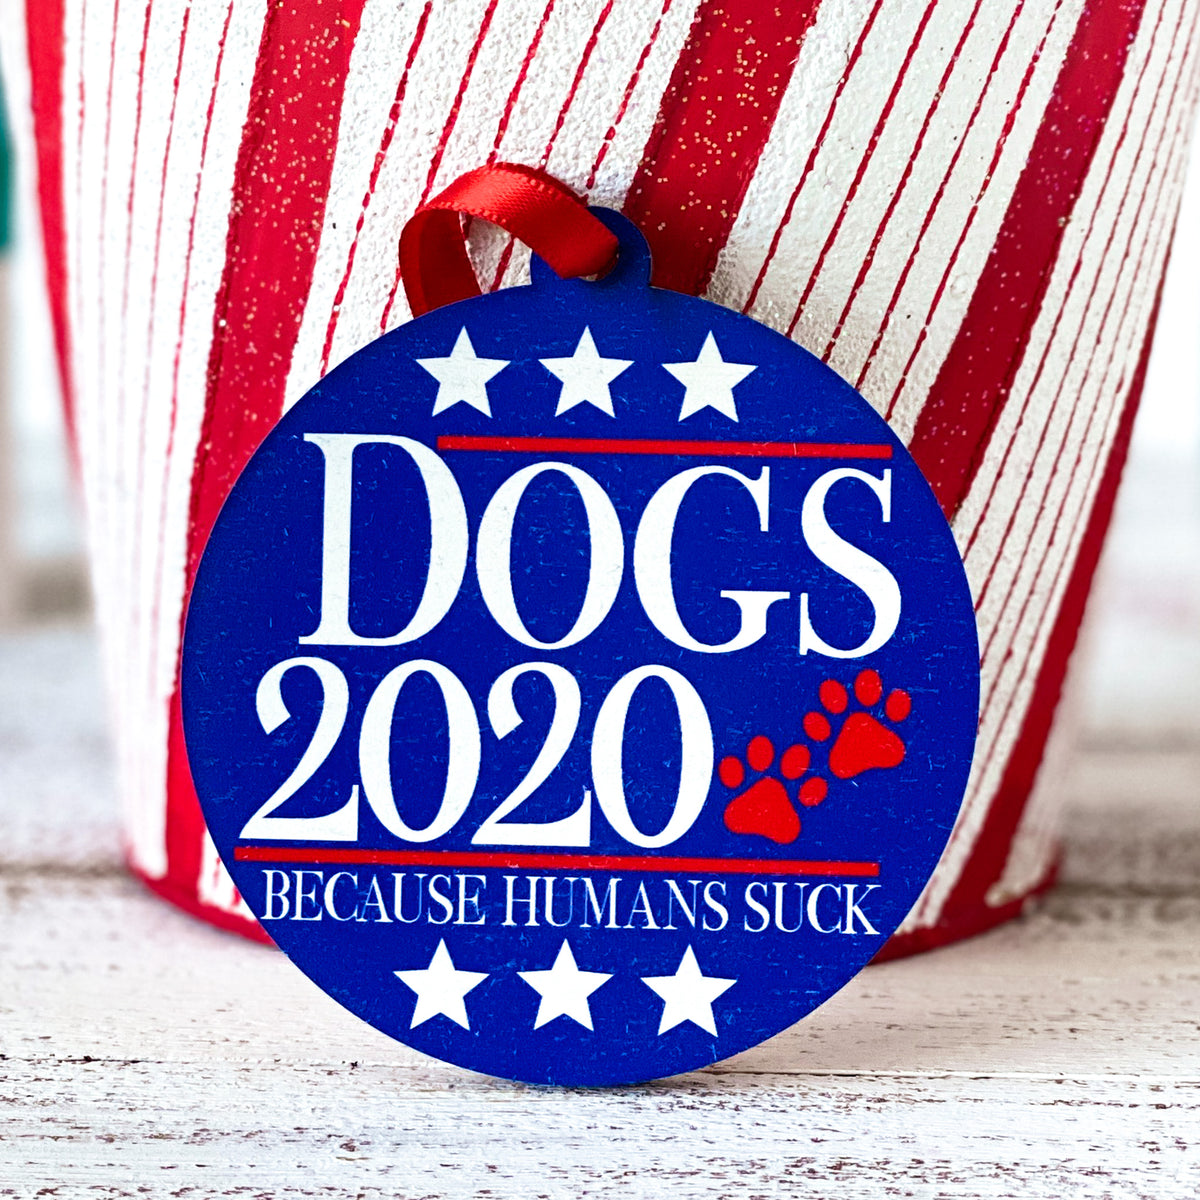 Dogs 2020 Because Humans Suck